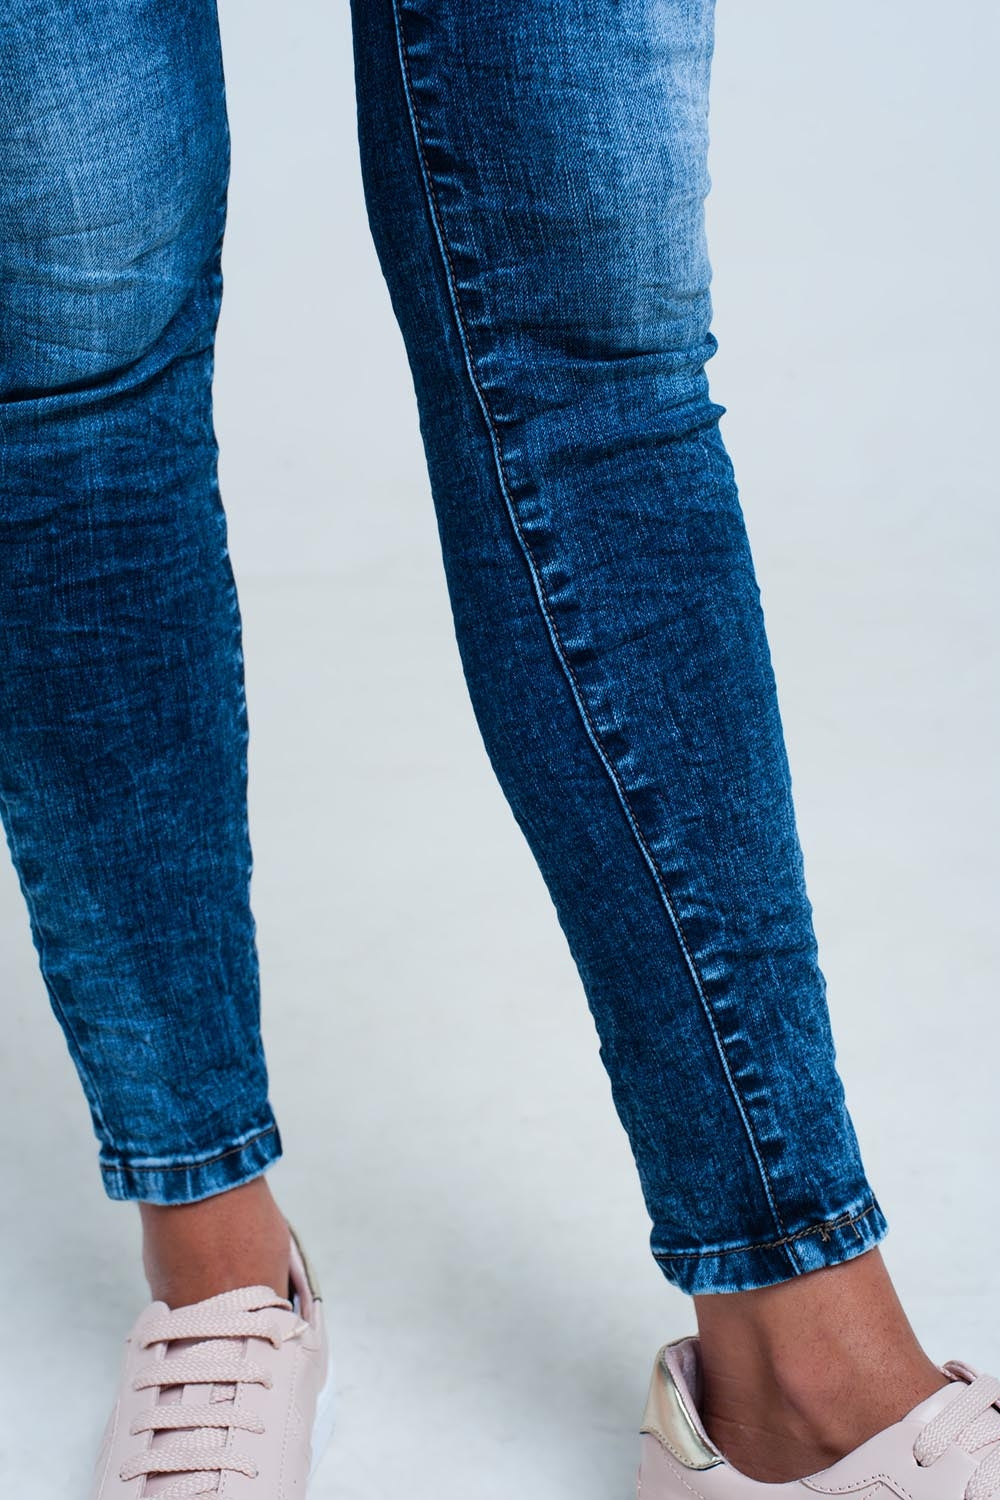 high waist skinny jeans in bright blue washJeans